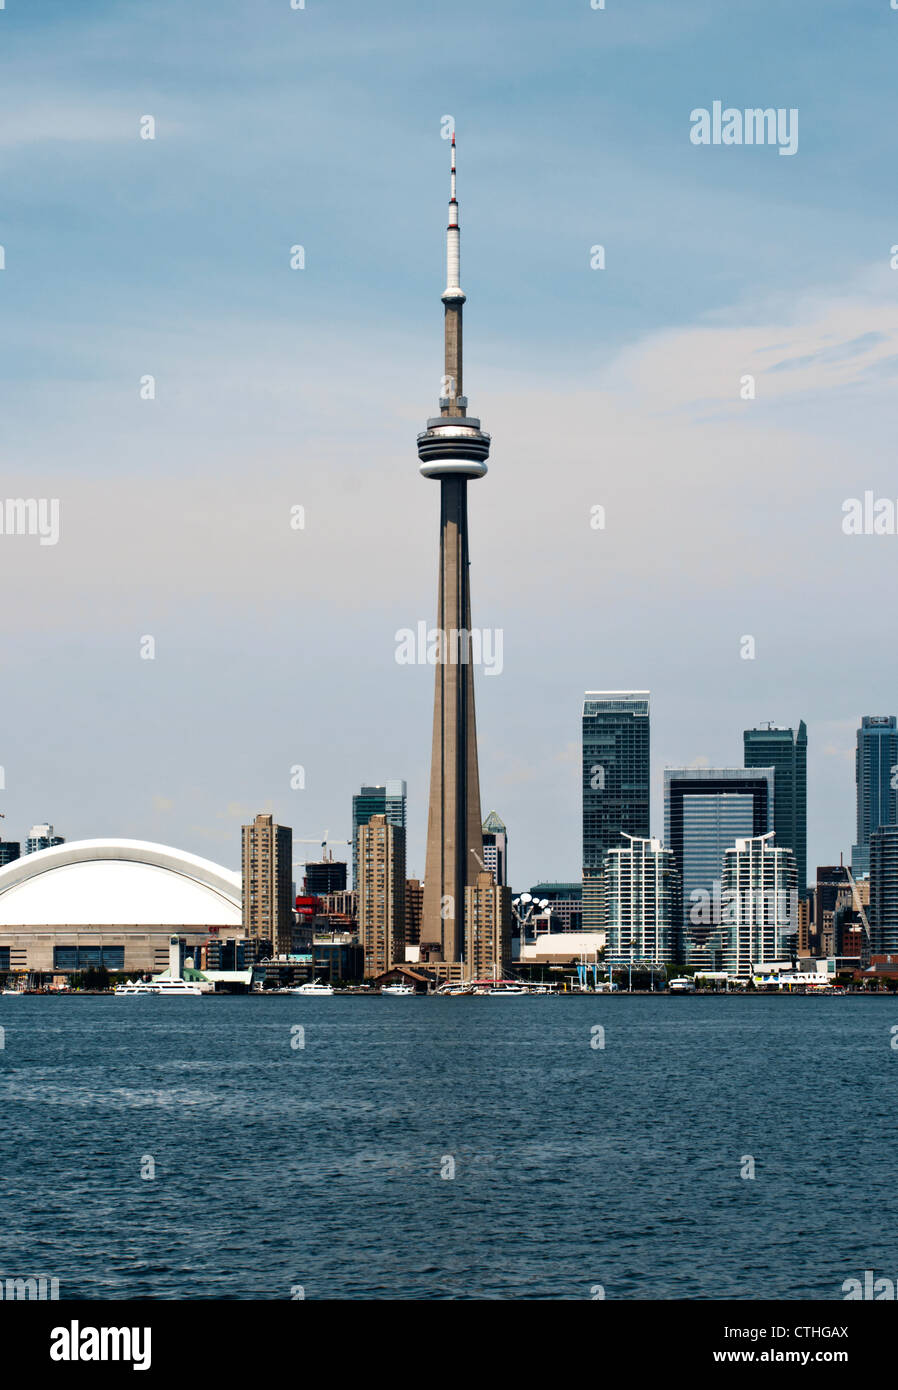 City skyline of Toronto, Canada from lake Ontario with copy space. Stock Photo